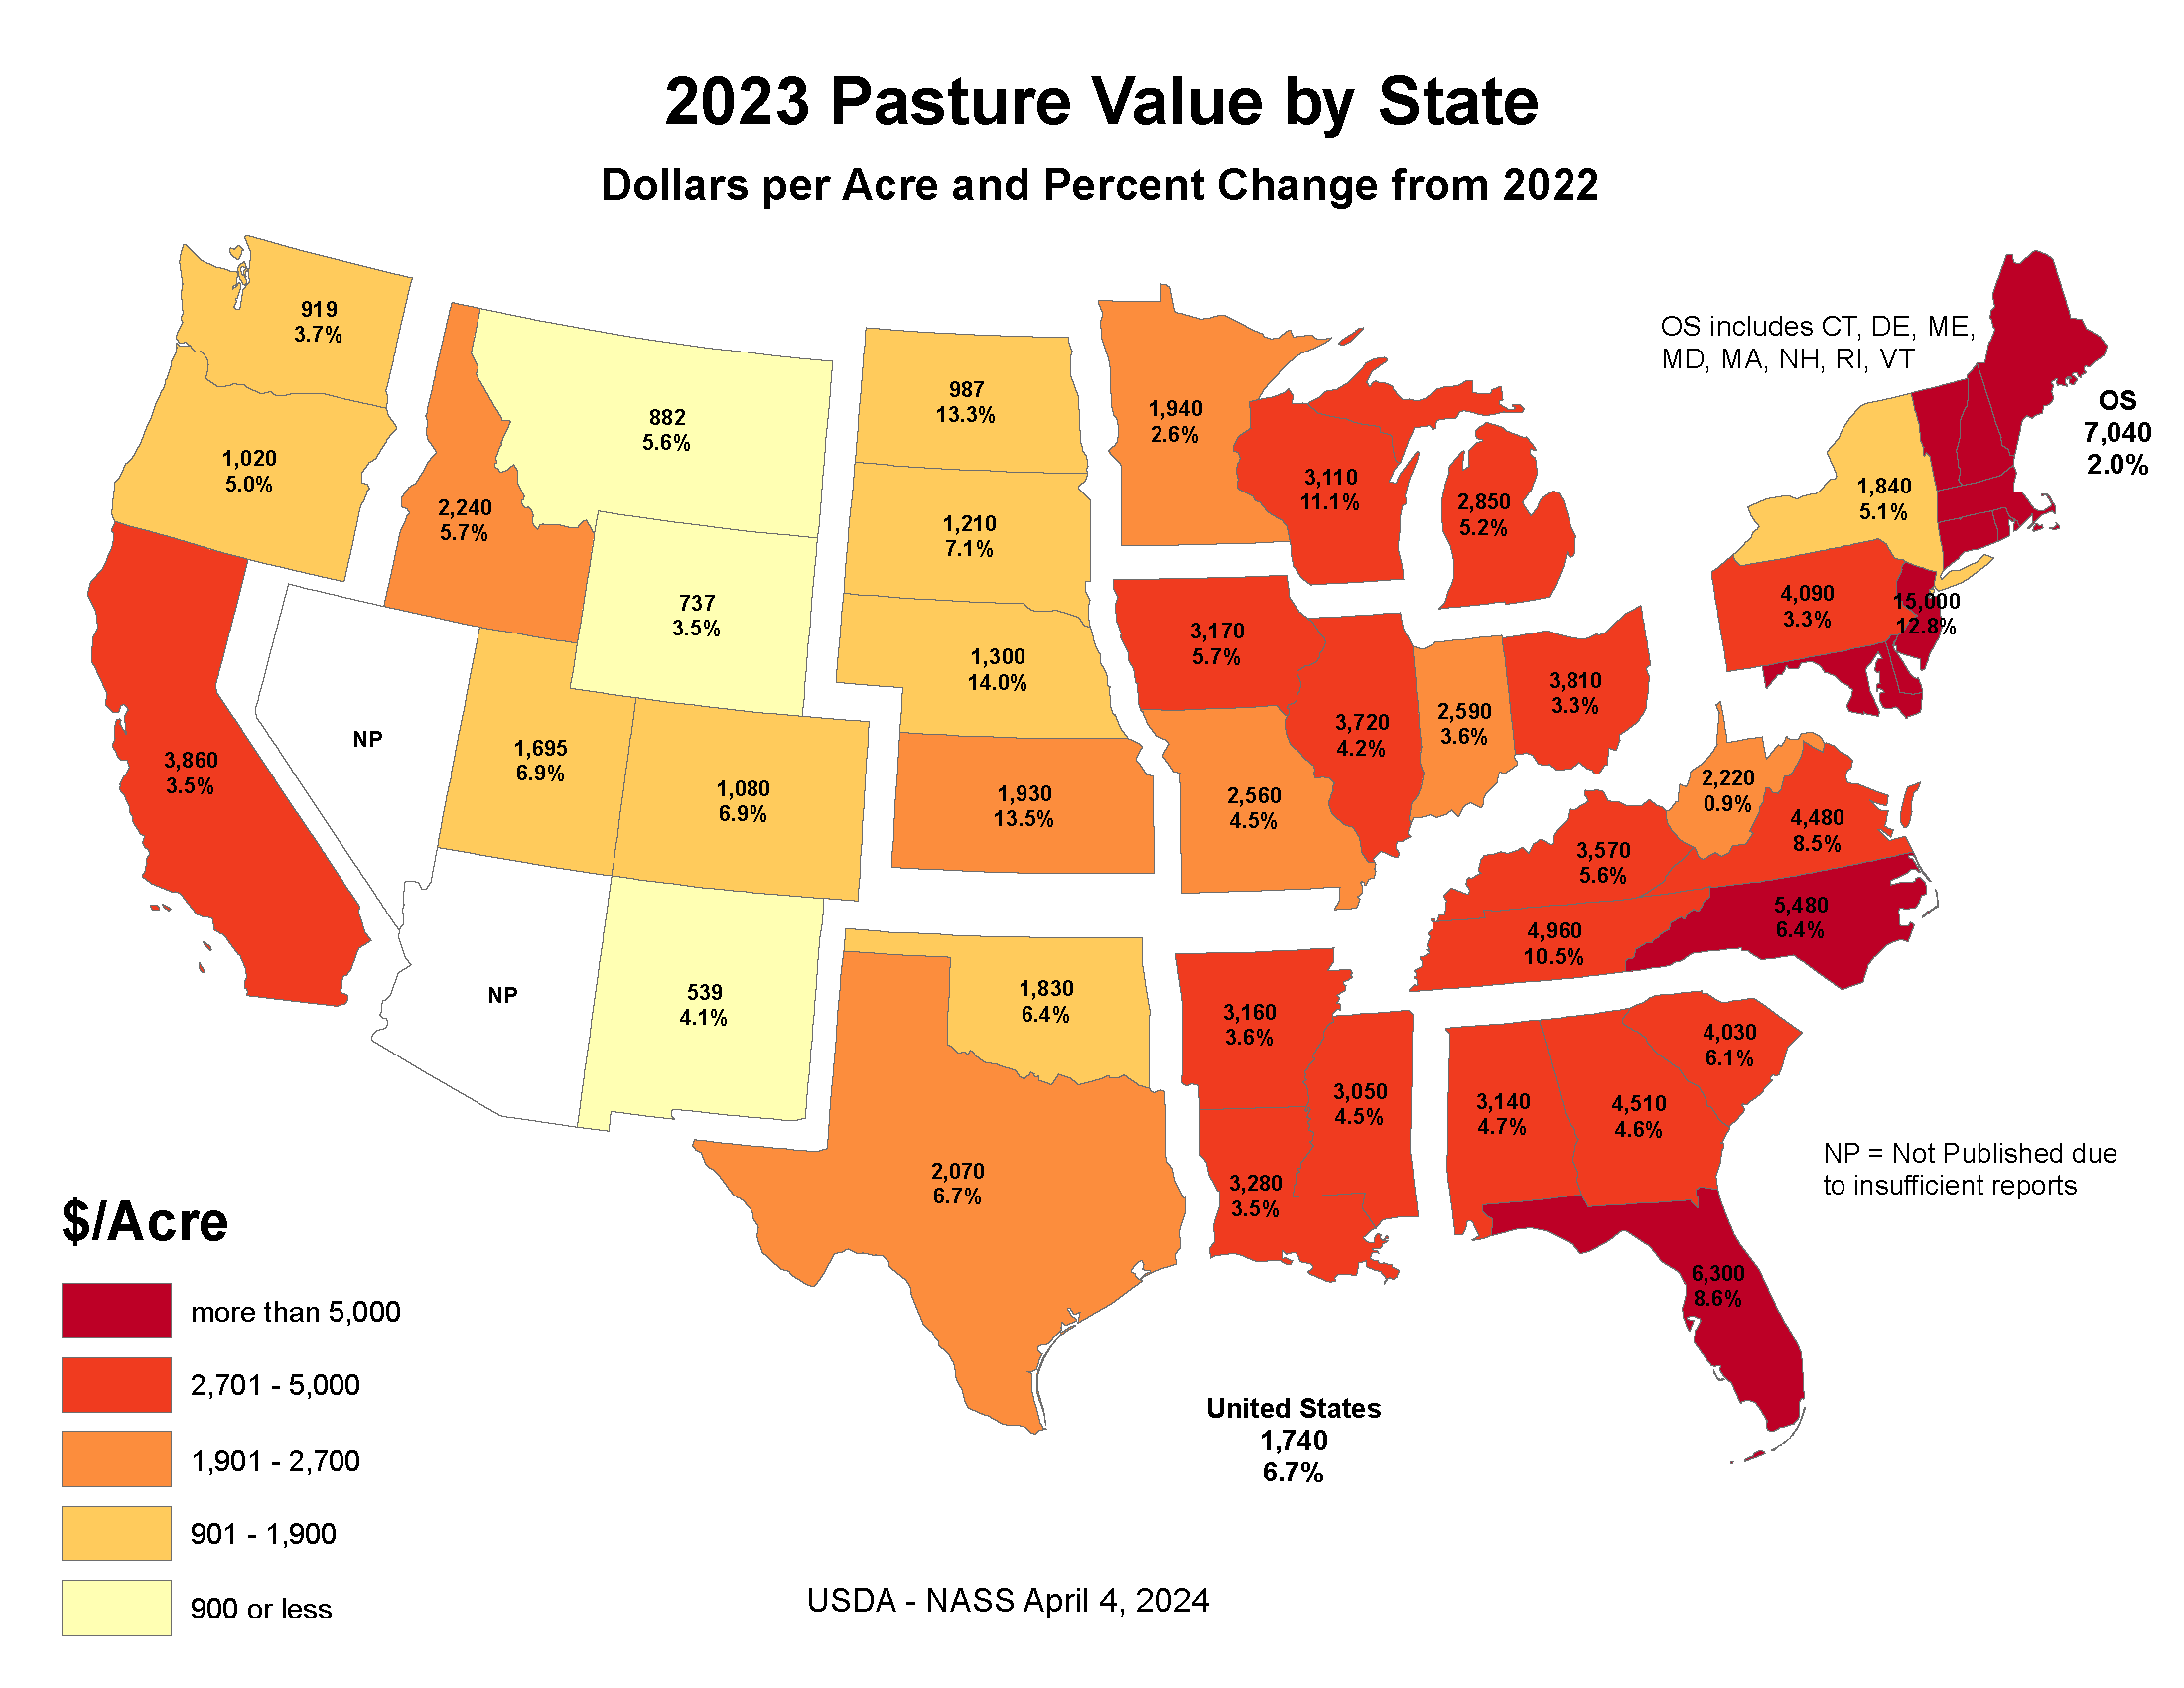 Land Values: Pasture Value by State, US